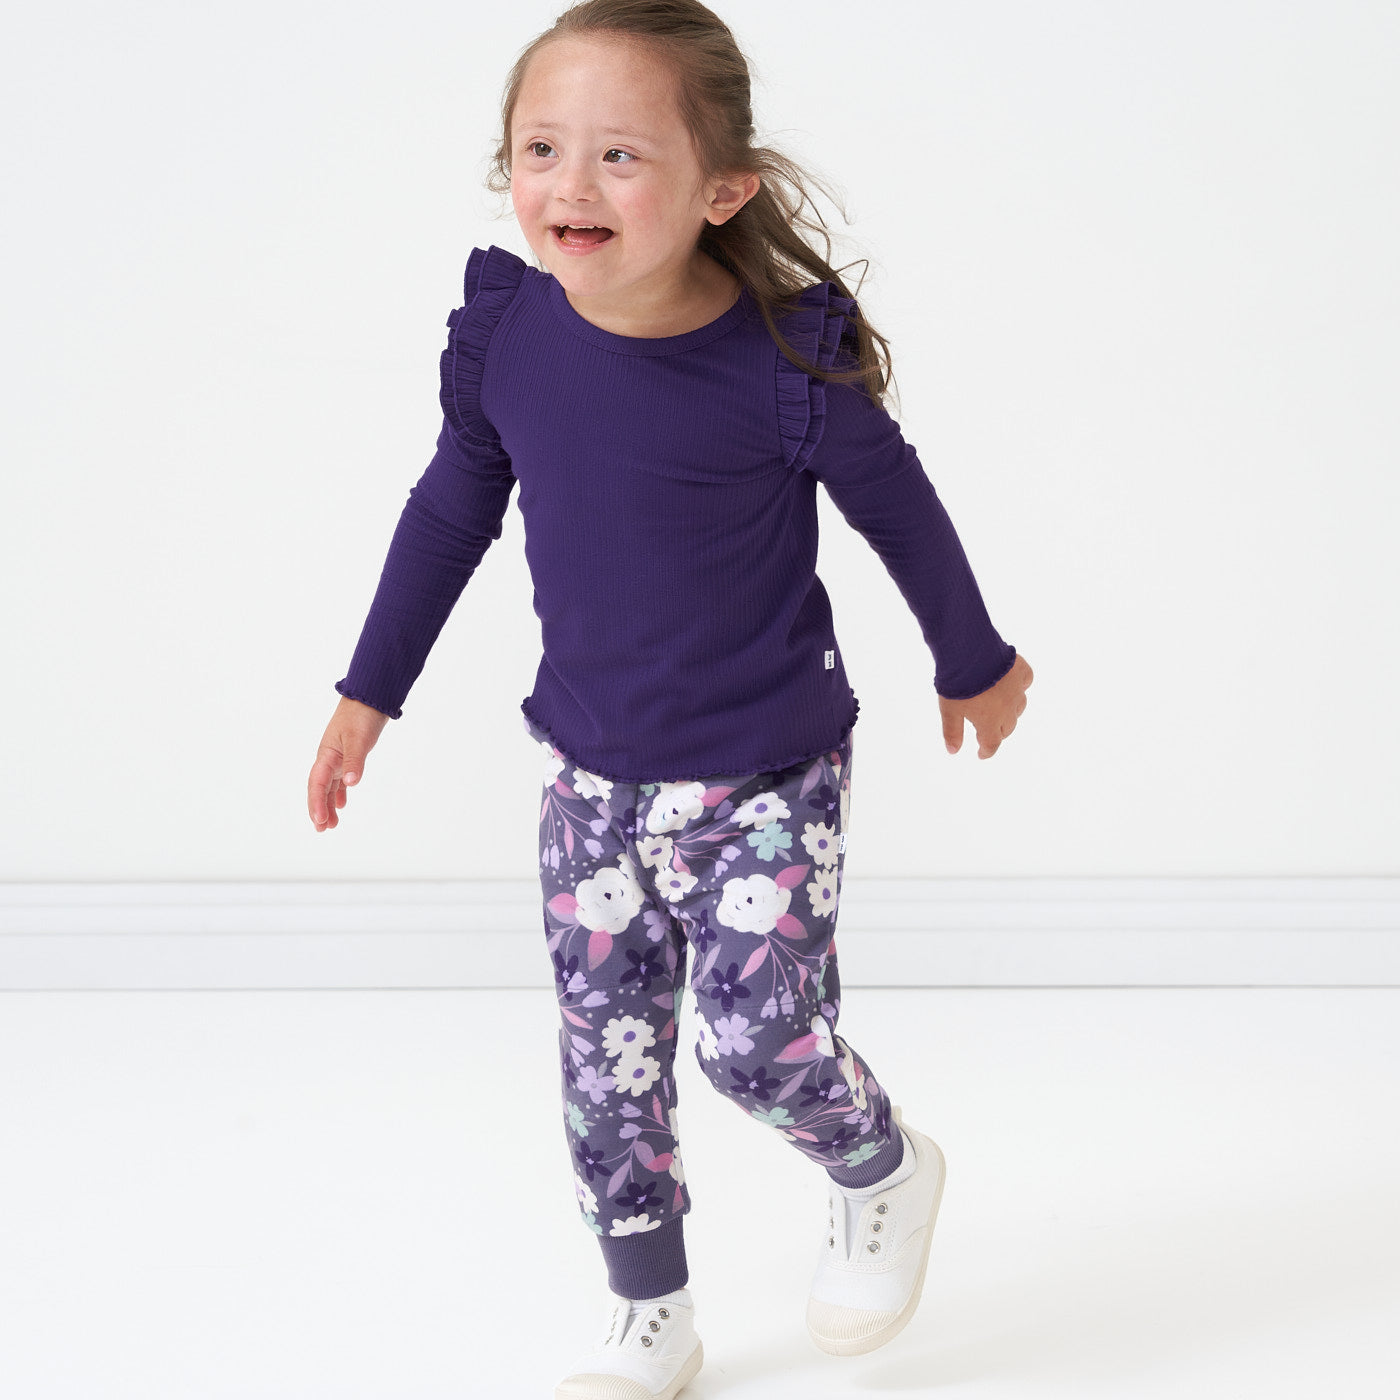 Child wearing a Deep Amethyst ribbed flutter lettuce tee and coordinating Sugar Plum Floral joggers